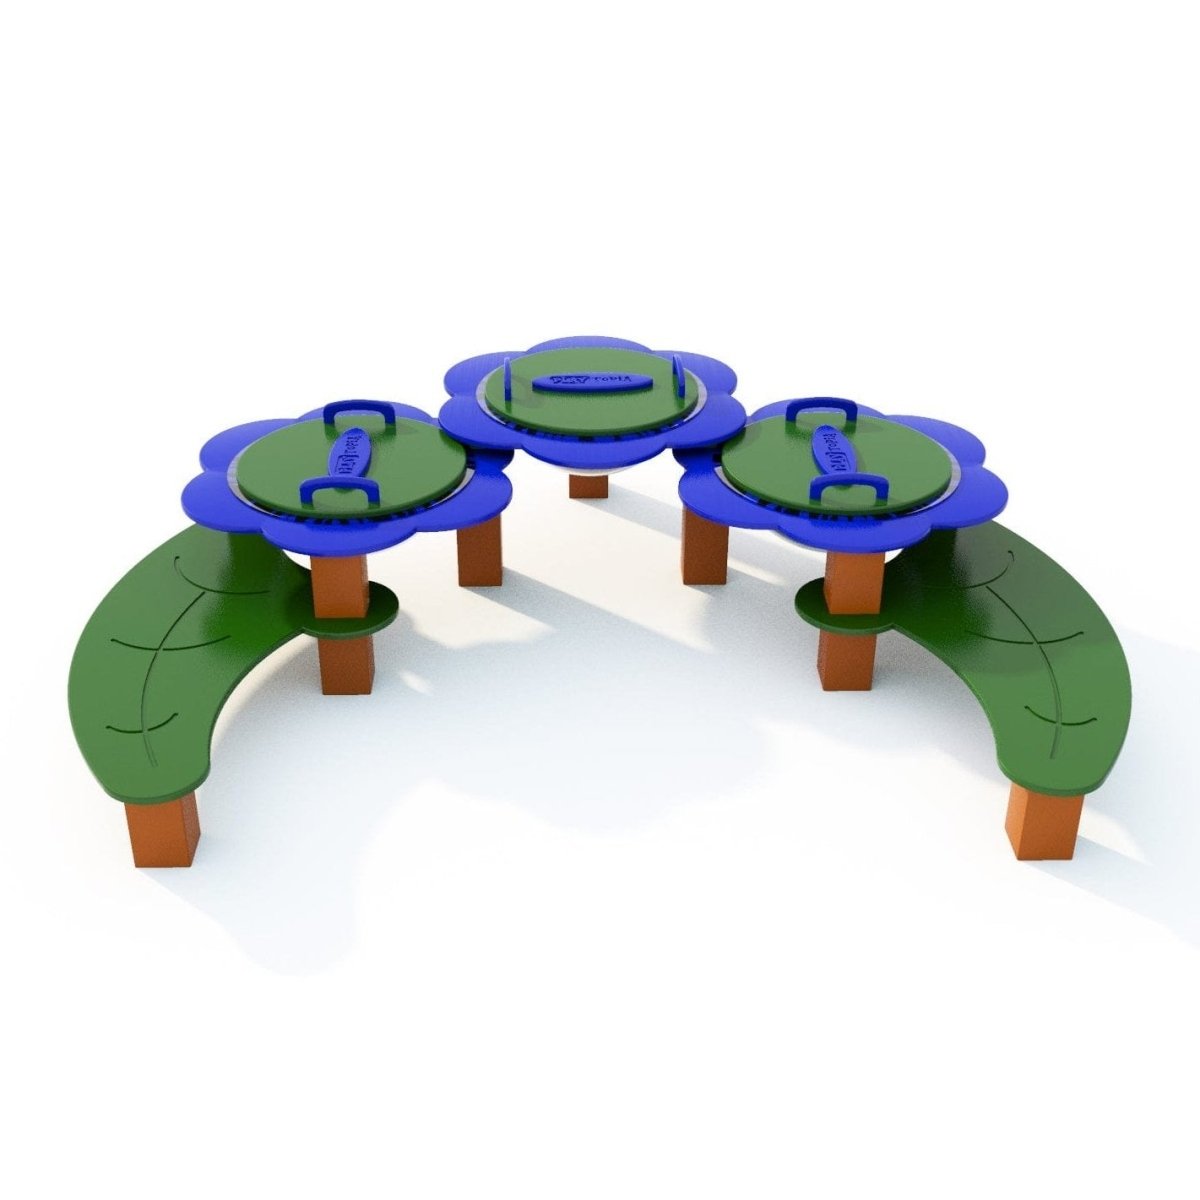 Flower Sand & Water Table - Playtopia, Inc.